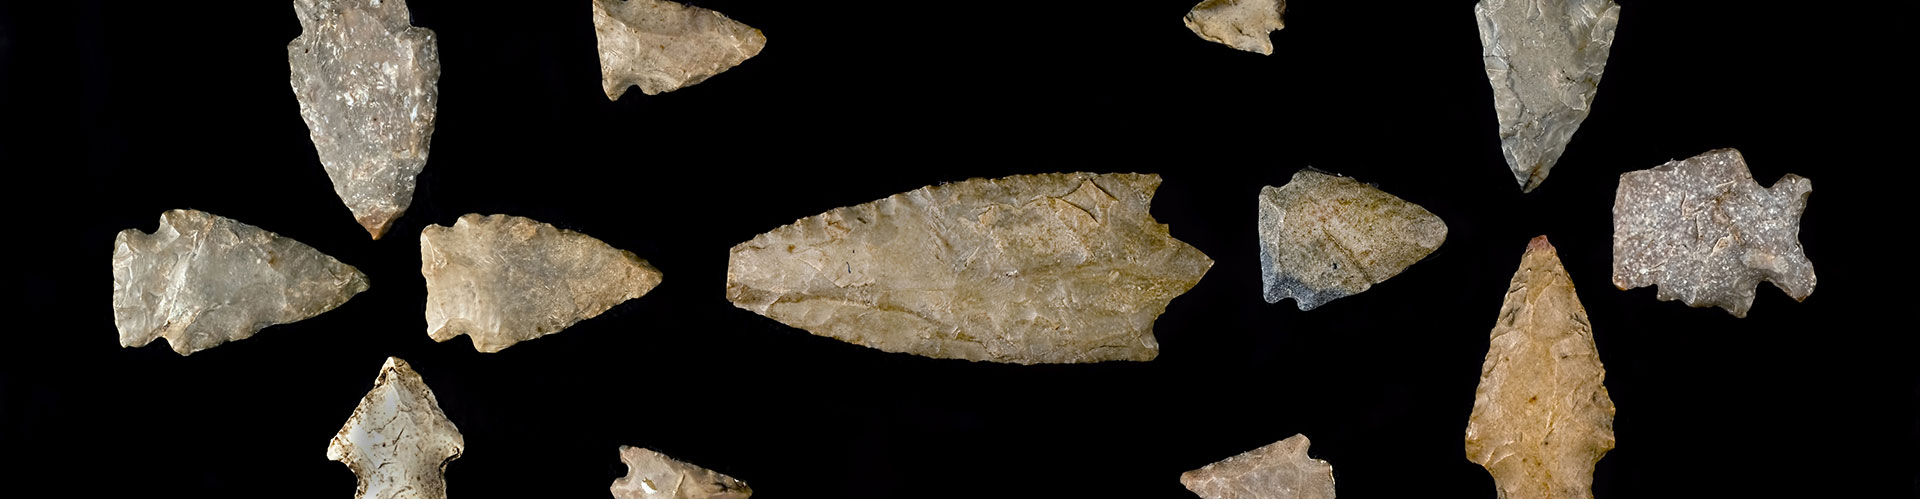 Arrowheads of Varying Sizes